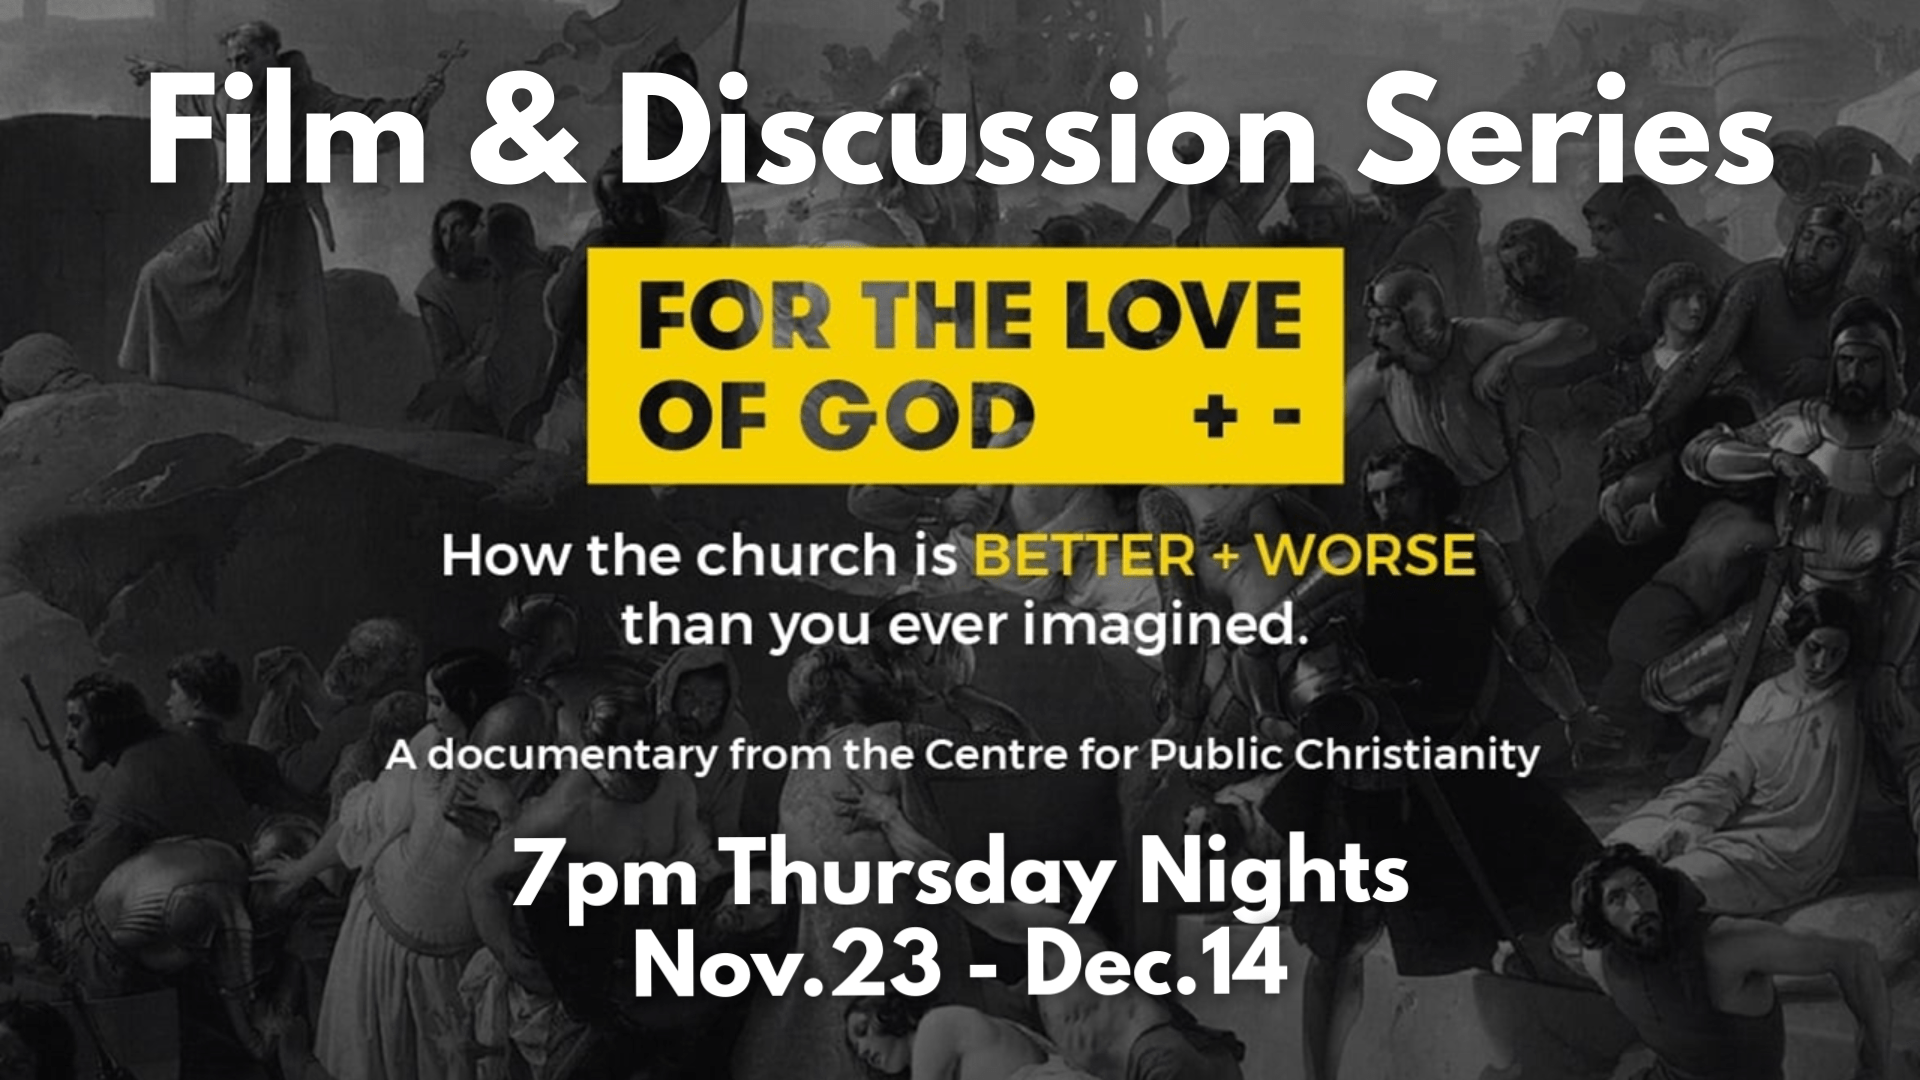 “For the Love of God” Film & Discussion Series